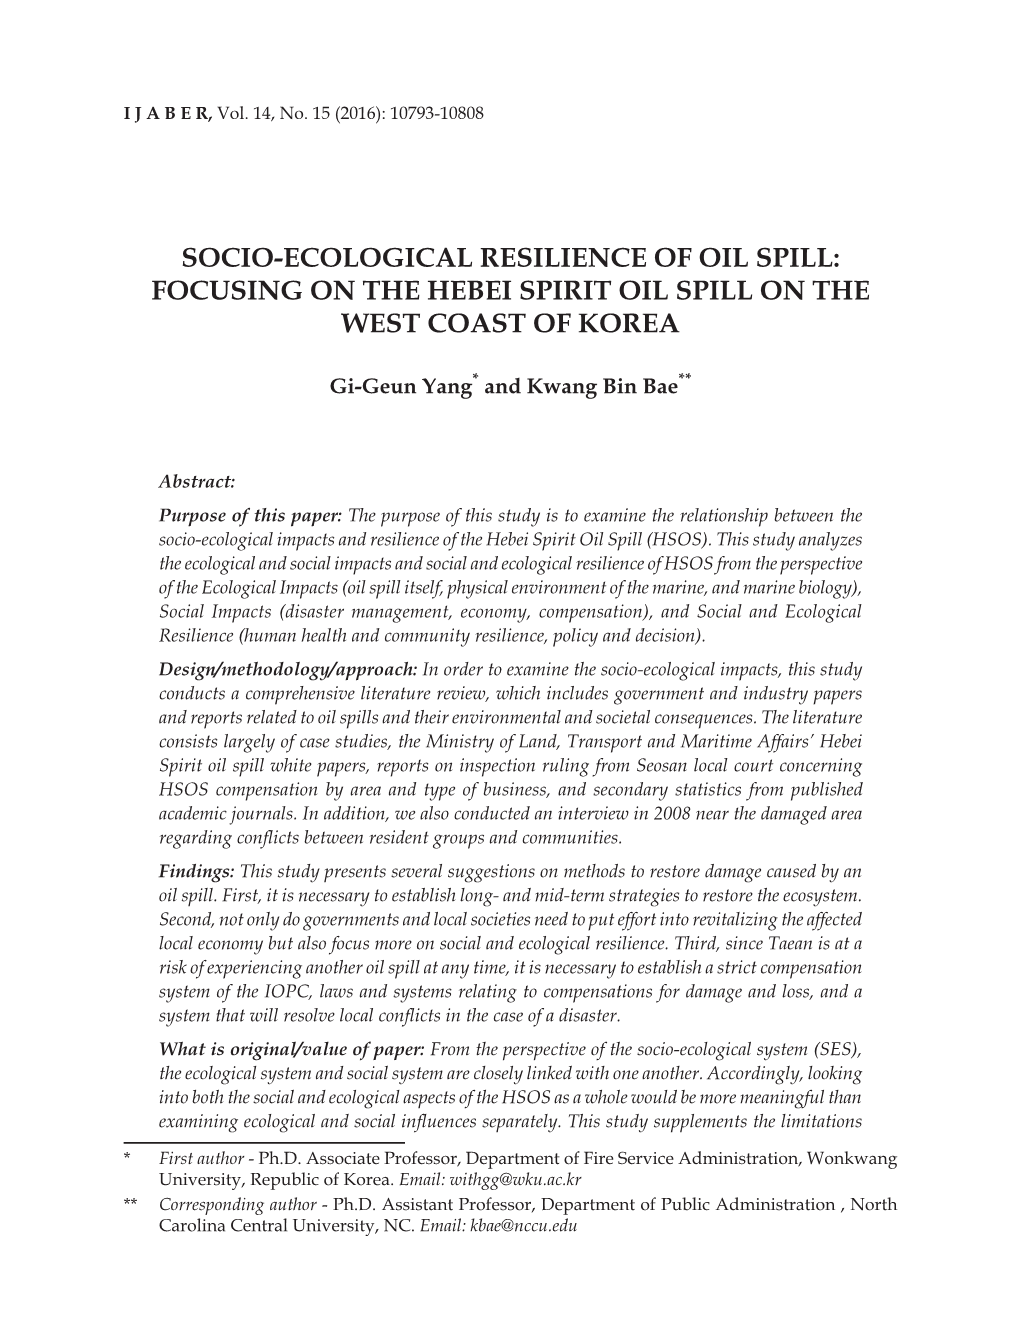 Socio-Ecological Resilience of Oil Spill: Focusing on the Hebei Spirit Oil Spill on the West Coast of Korea